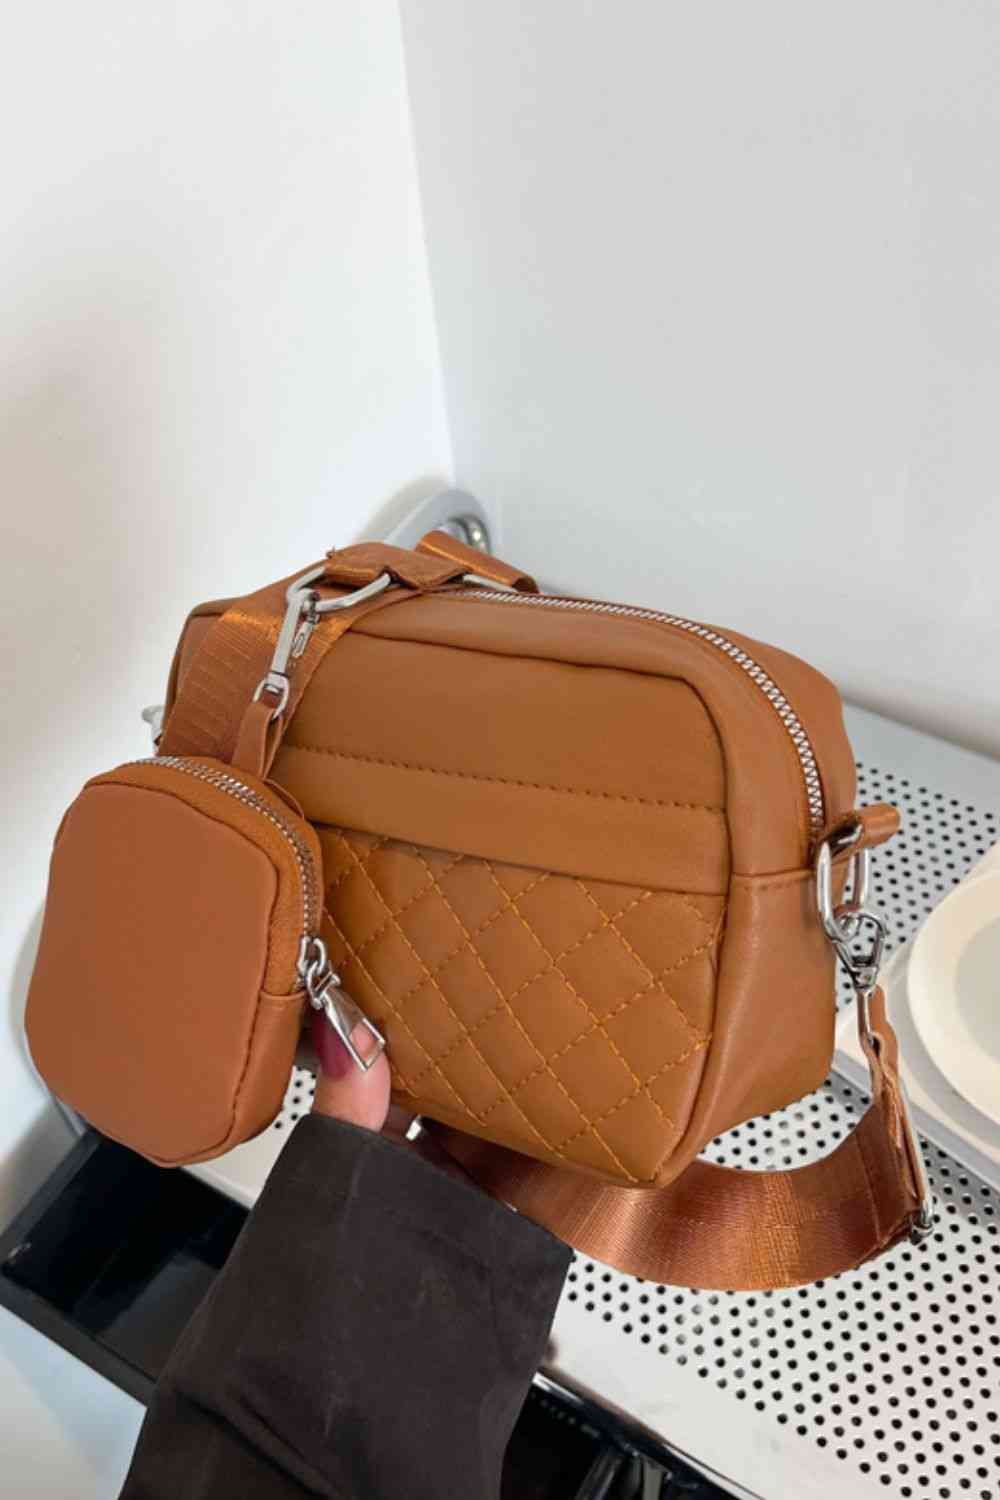 Adored PU Leather Shoulder Bag with Small Purse Caramel One Size